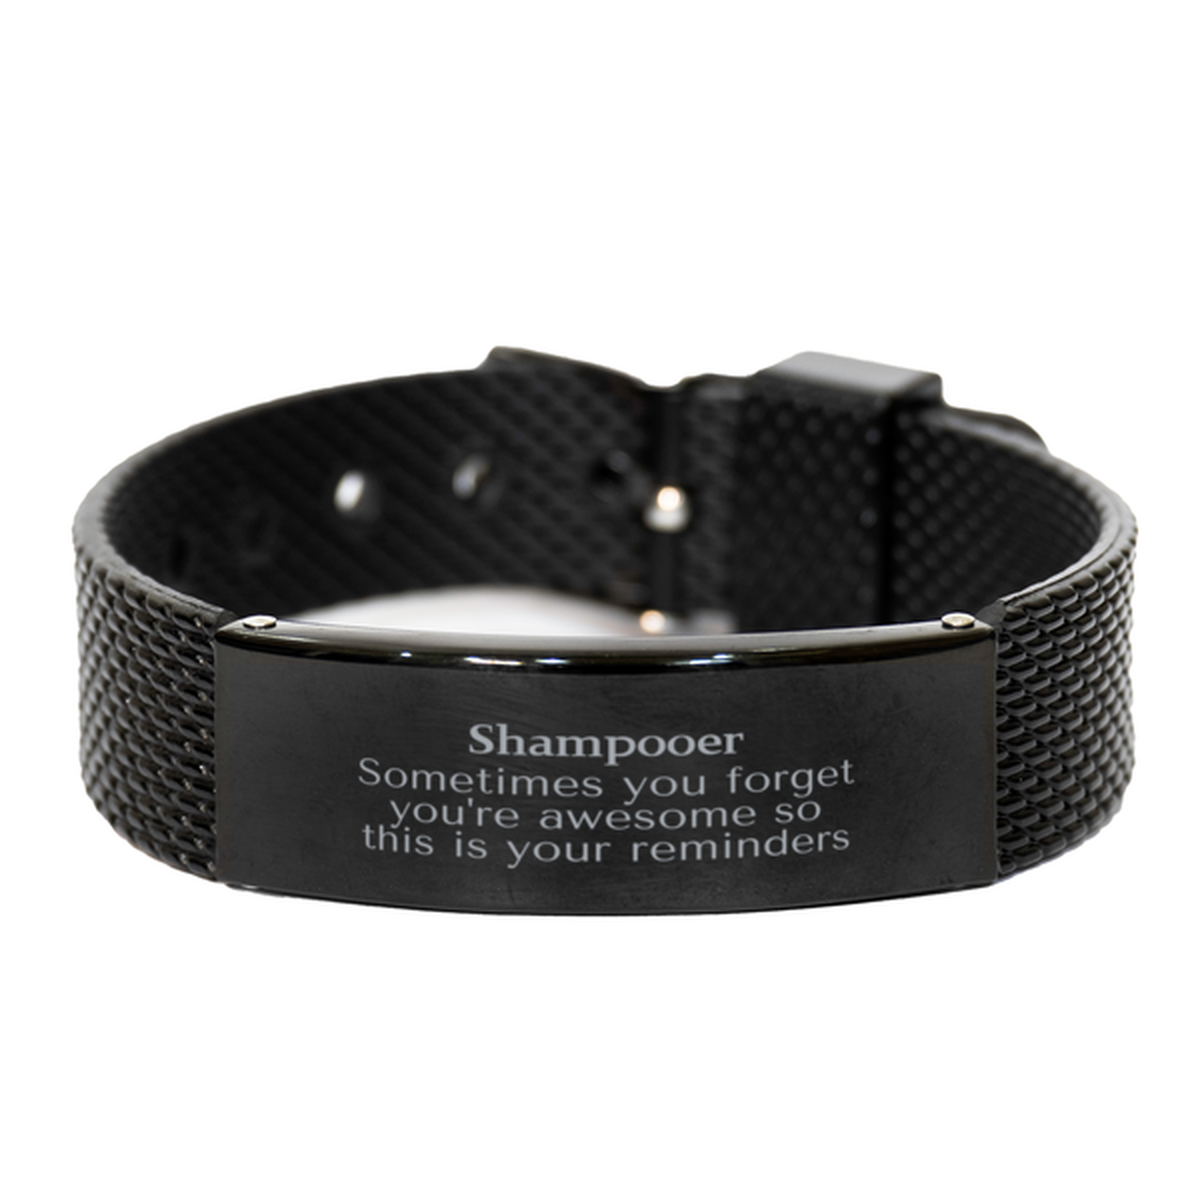 Sentimental Shampooer Black Shark Mesh Bracelet, Shampooer Sometimes you forget you're awesome so this is your reminders, Graduation Christmas Birthday Gifts for Shampooer, Men, Women, Coworkers